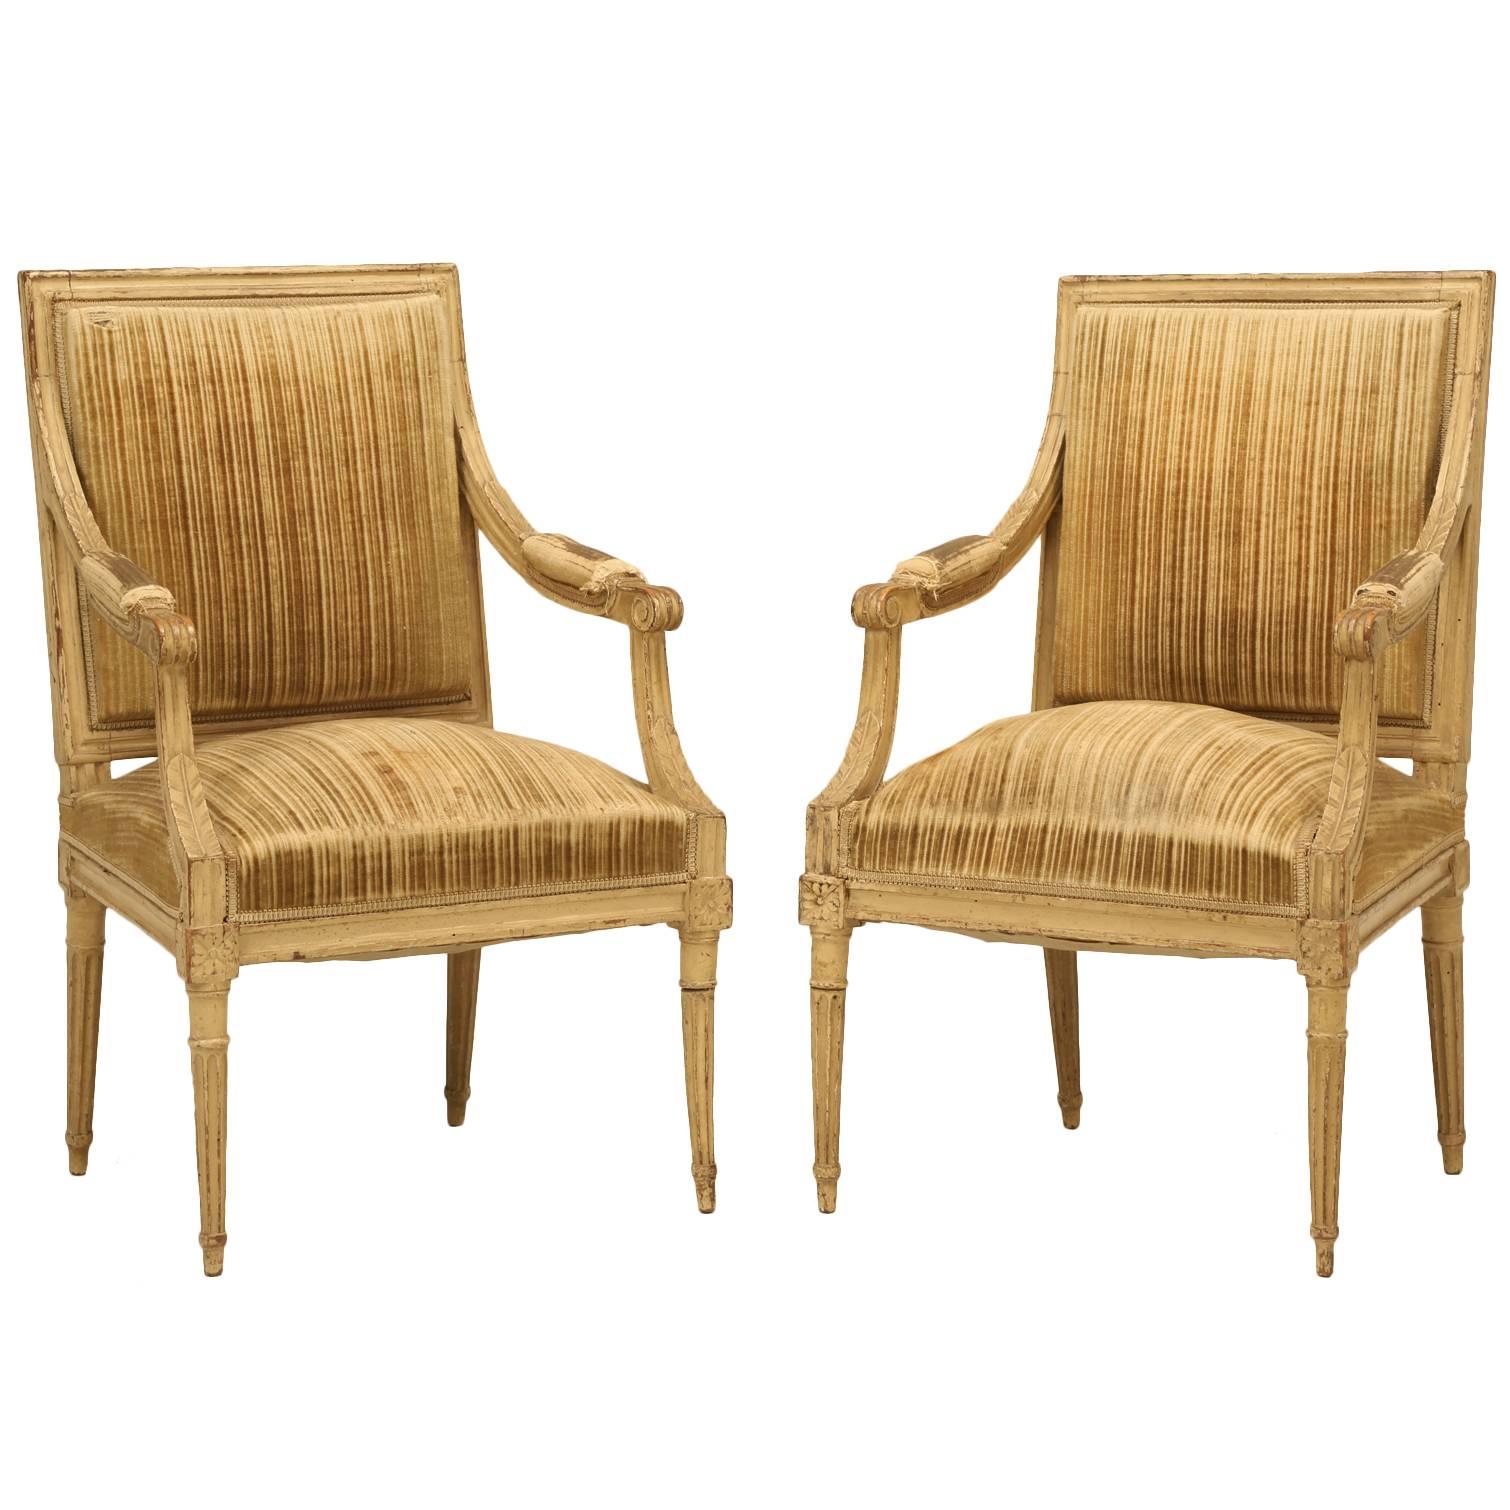 Antique Louis XVI Pair of Armchairs in Original Crumbly Paint with Great Patina For Sale